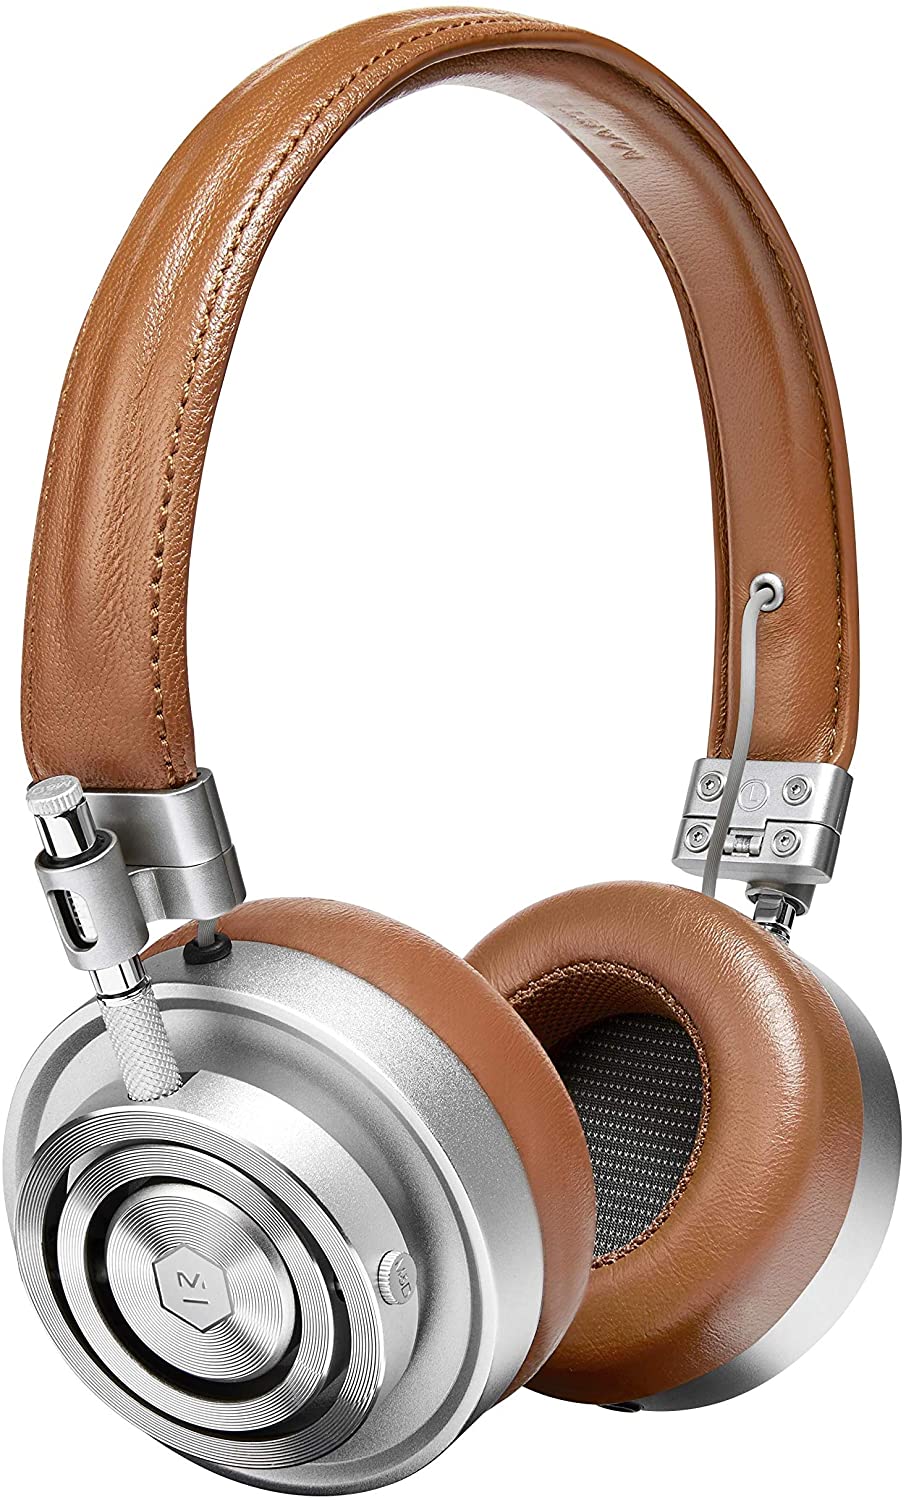 Master and dynamic headphones